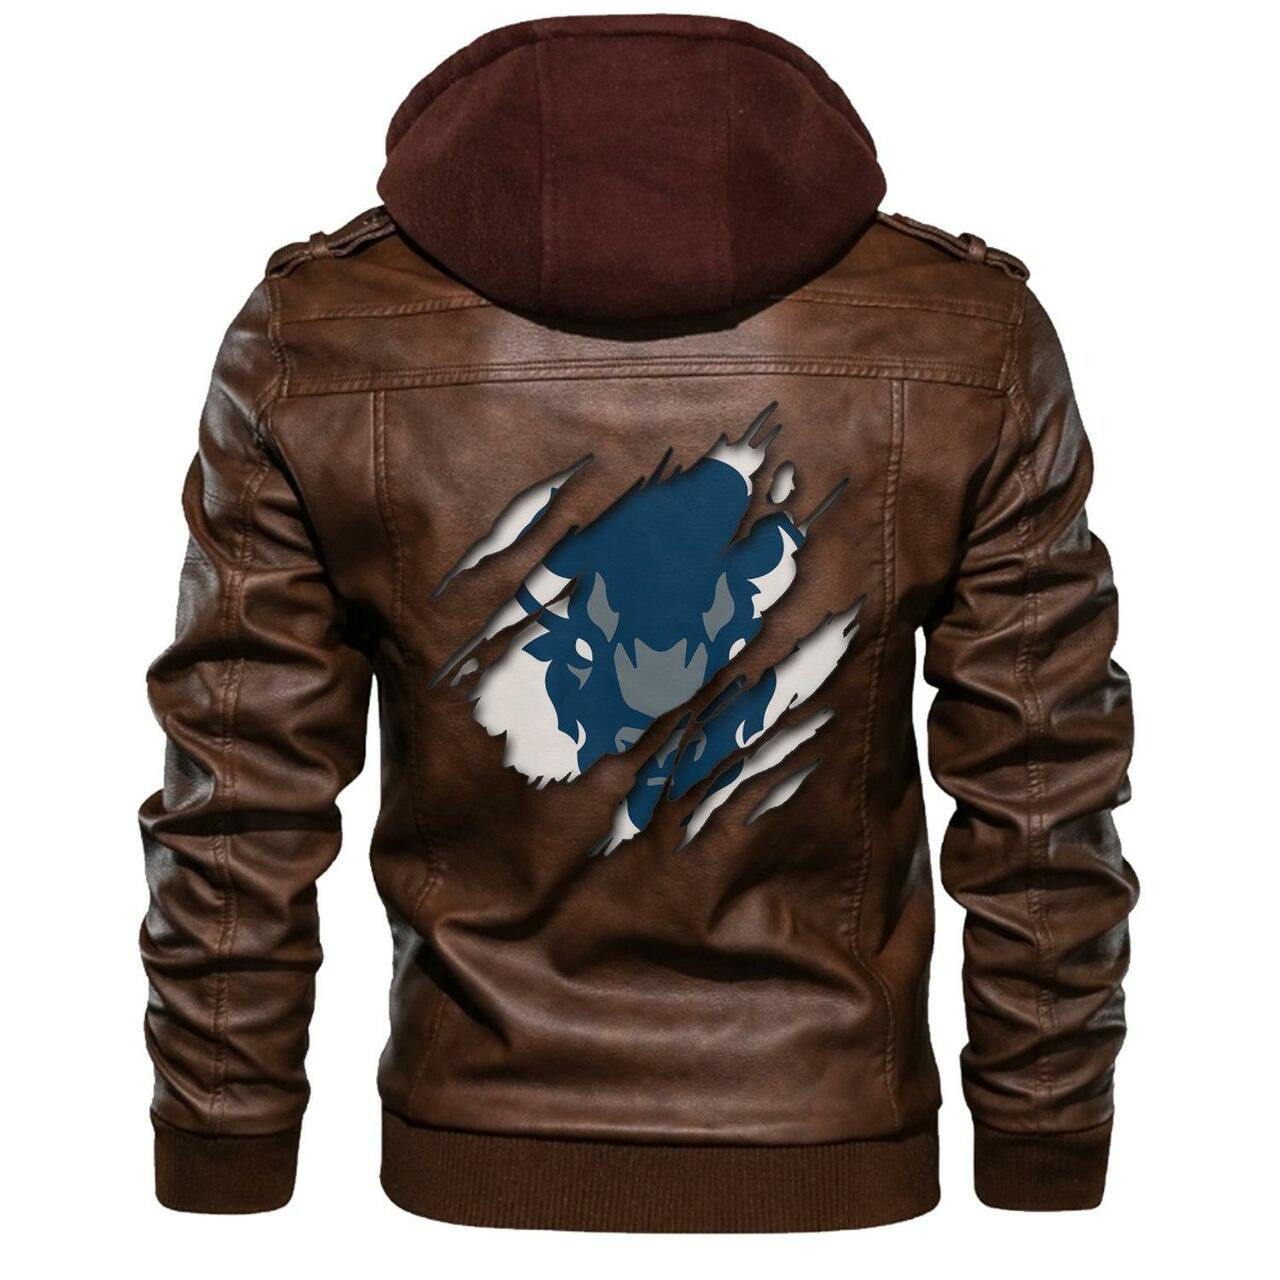 Check out and find the right leather jacket below 58